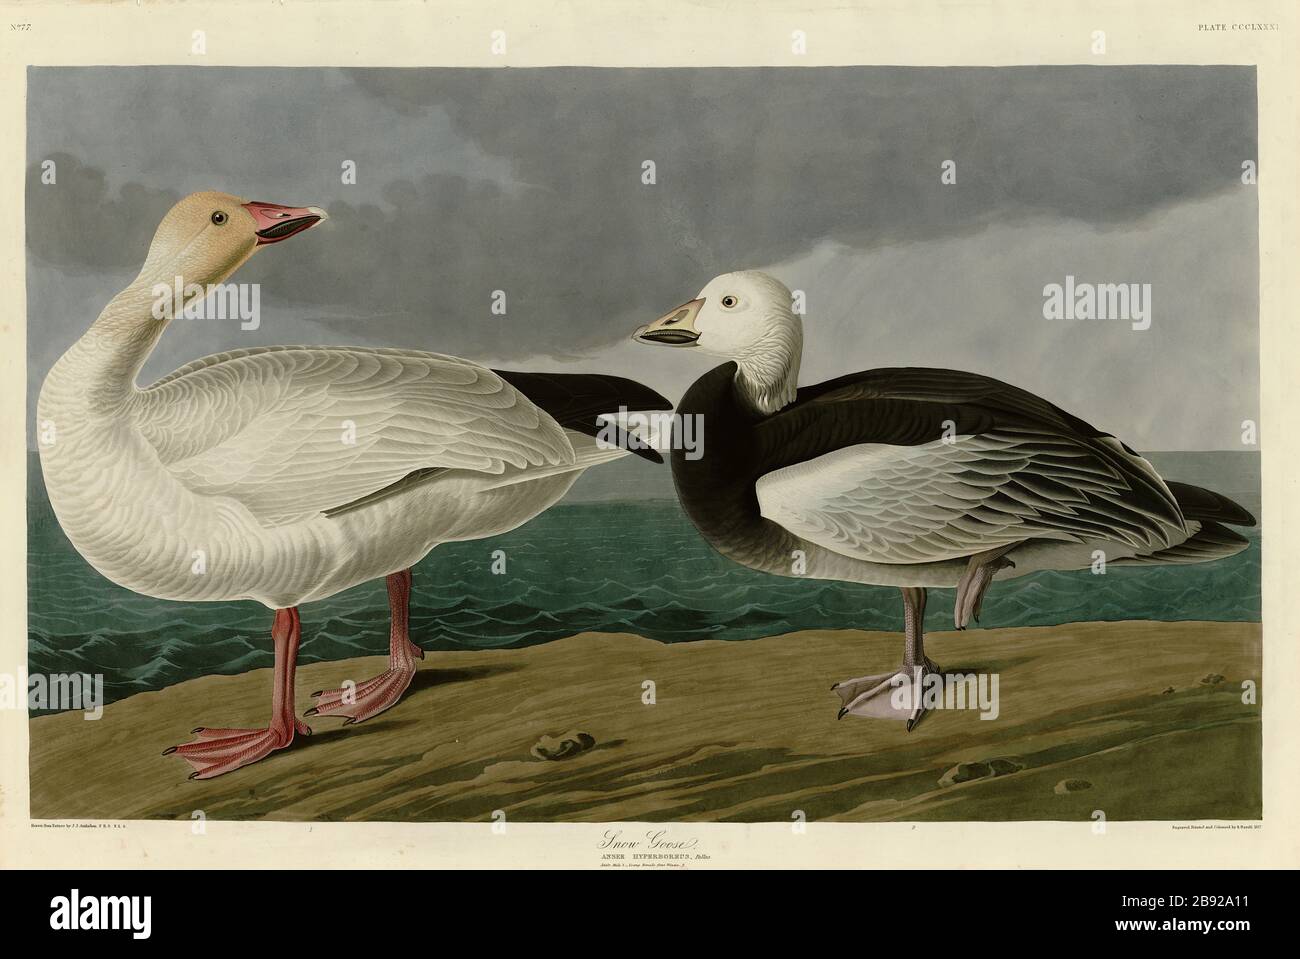 Plate 381 Snow Goose, from The Birds of America folio (1827–1839) by John James Audubon - Very high resolution and quality edited image Stock Photo